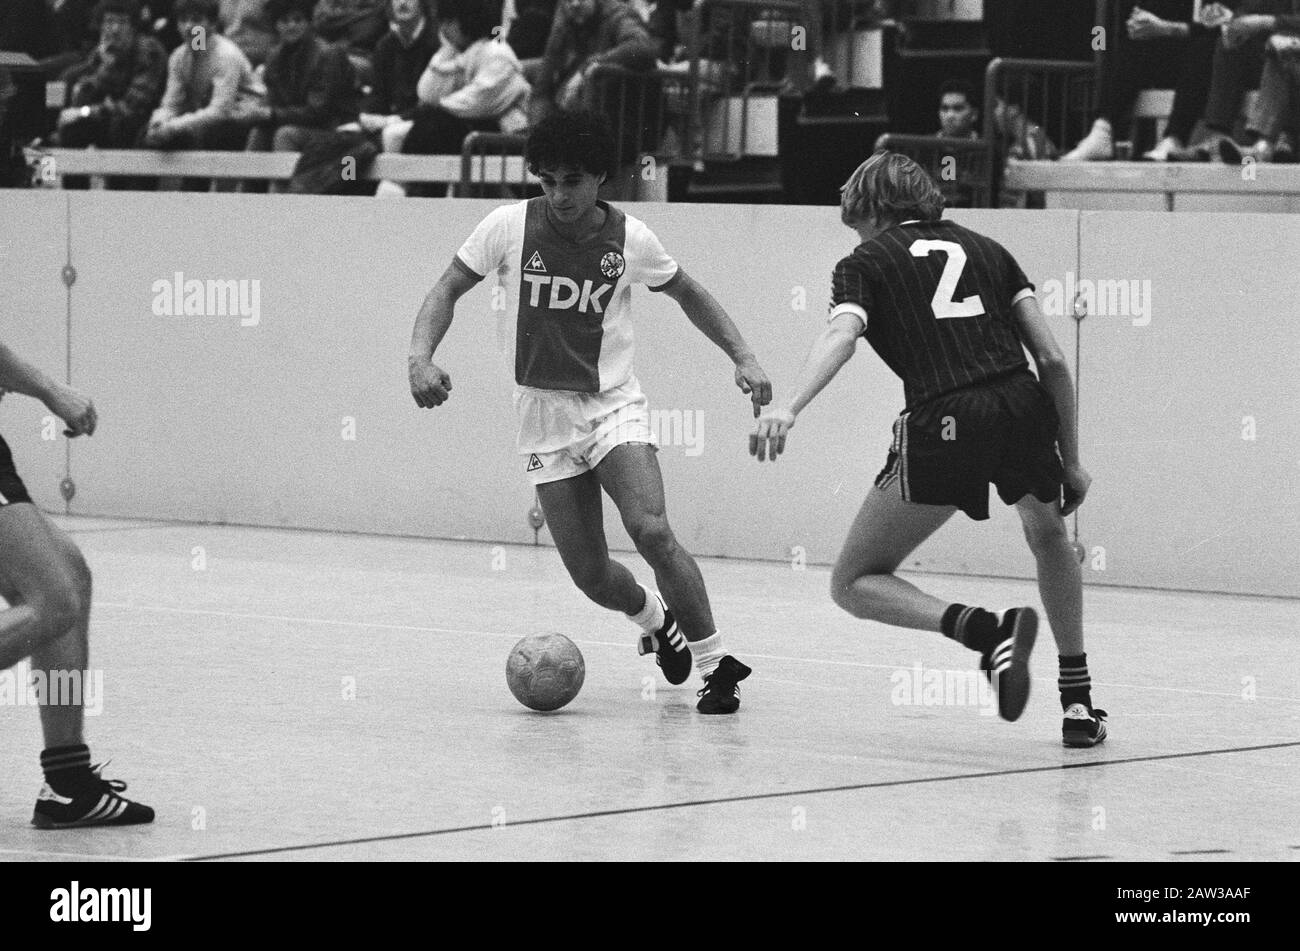 KNVB Sony Indoor Soccer Tournament Ajax against Az67 in Sporthal Zuid in Amsterdam best player of the tournament Gerald Vanenburg (m) of Ajax in action Date: December 29, 1984 Location Amsterdam, Noord-Holland Keywords: sports, tournaments, football Name of Person: Gerald Vanenburg Institution Name: AJAX Stock Photo